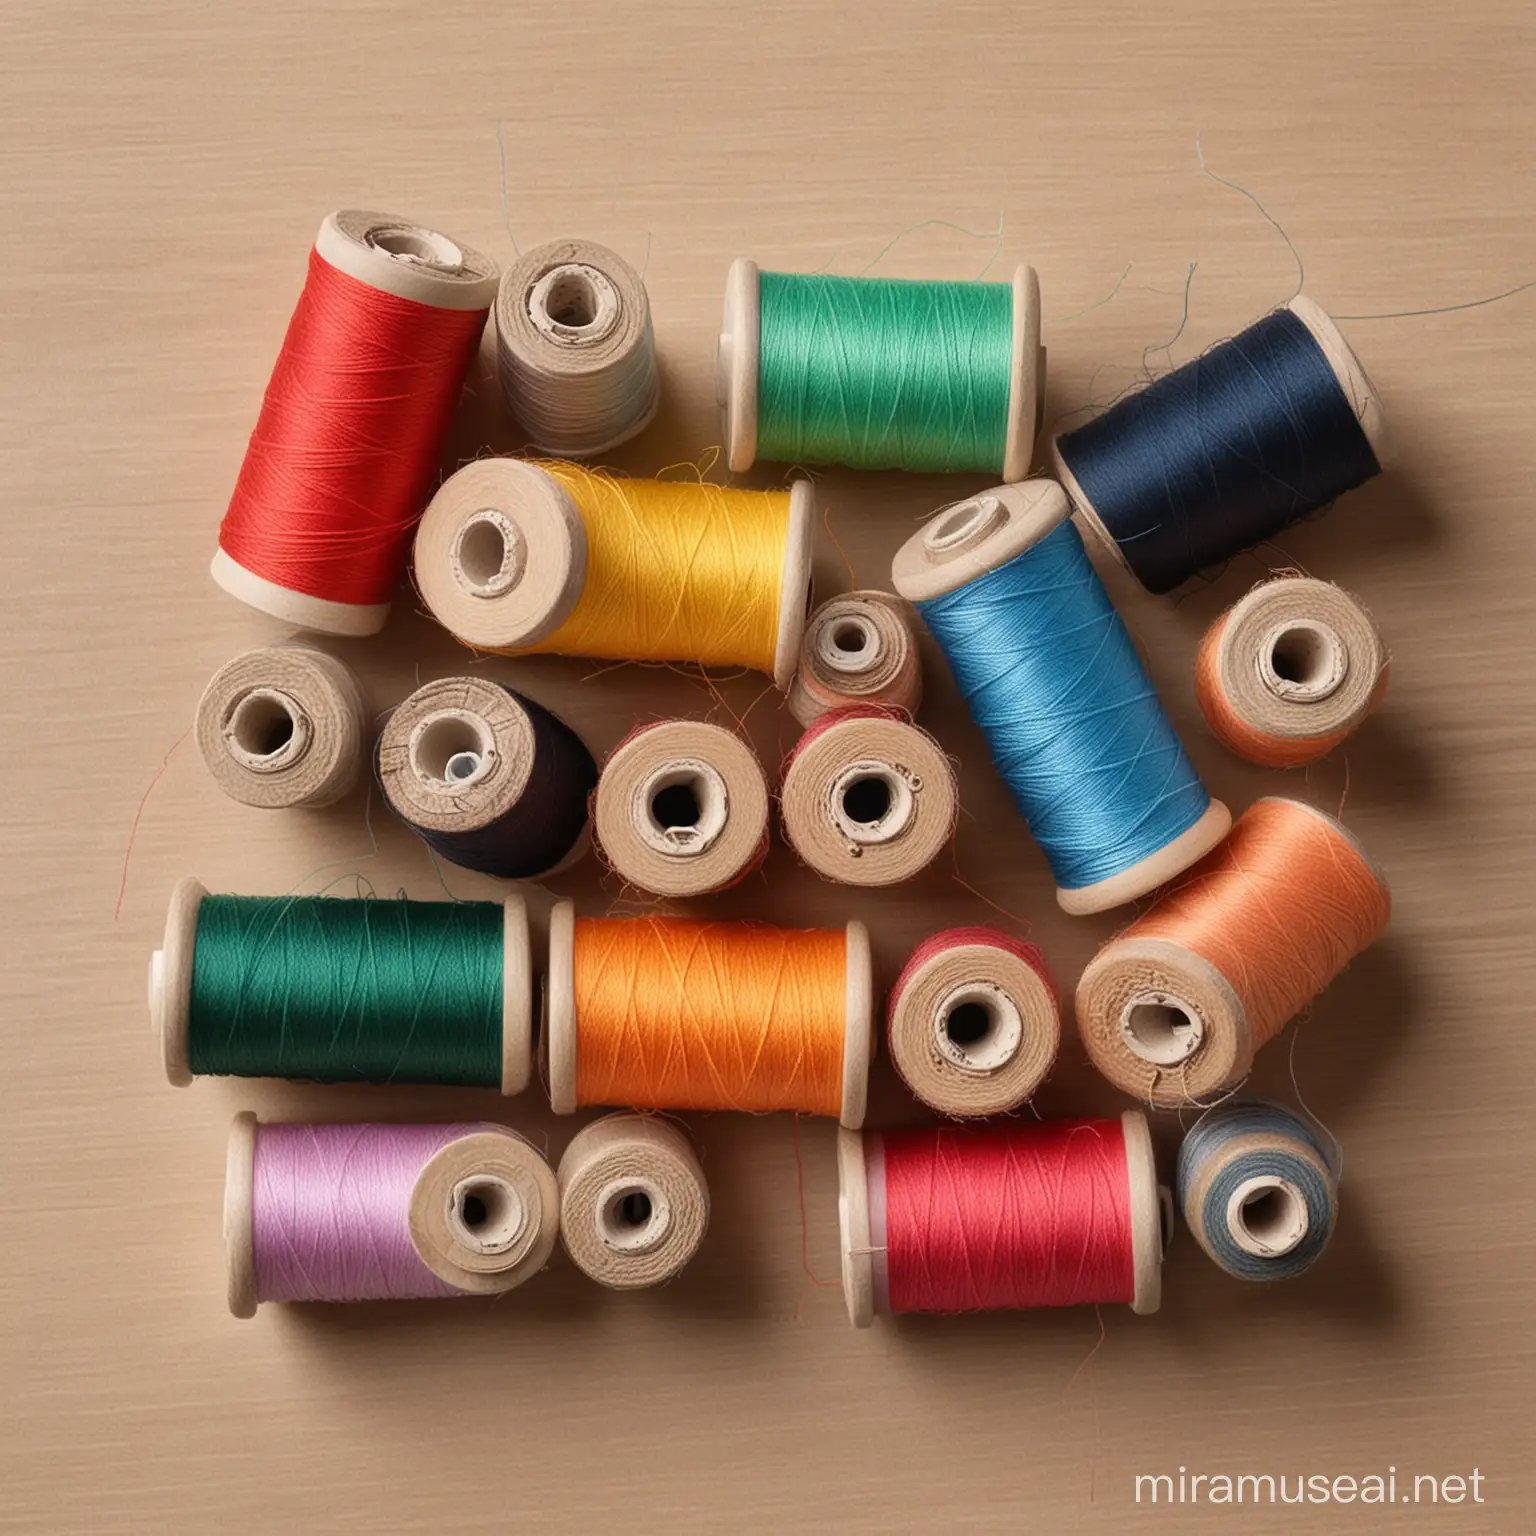   Picture of spools of colored thread 